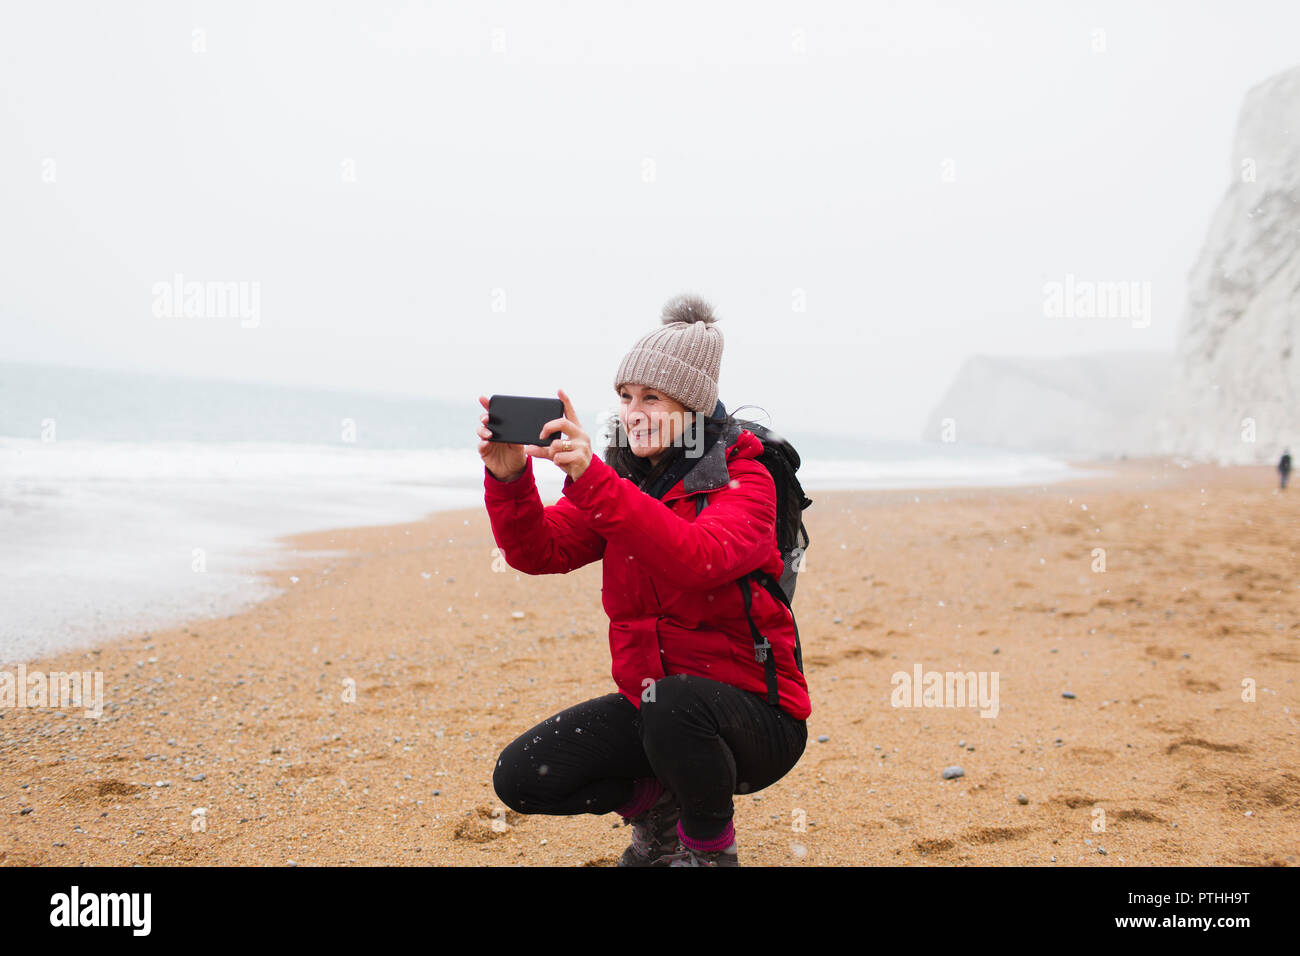 Woman in warm clothing using camera phone on snowy beach Stock Photo